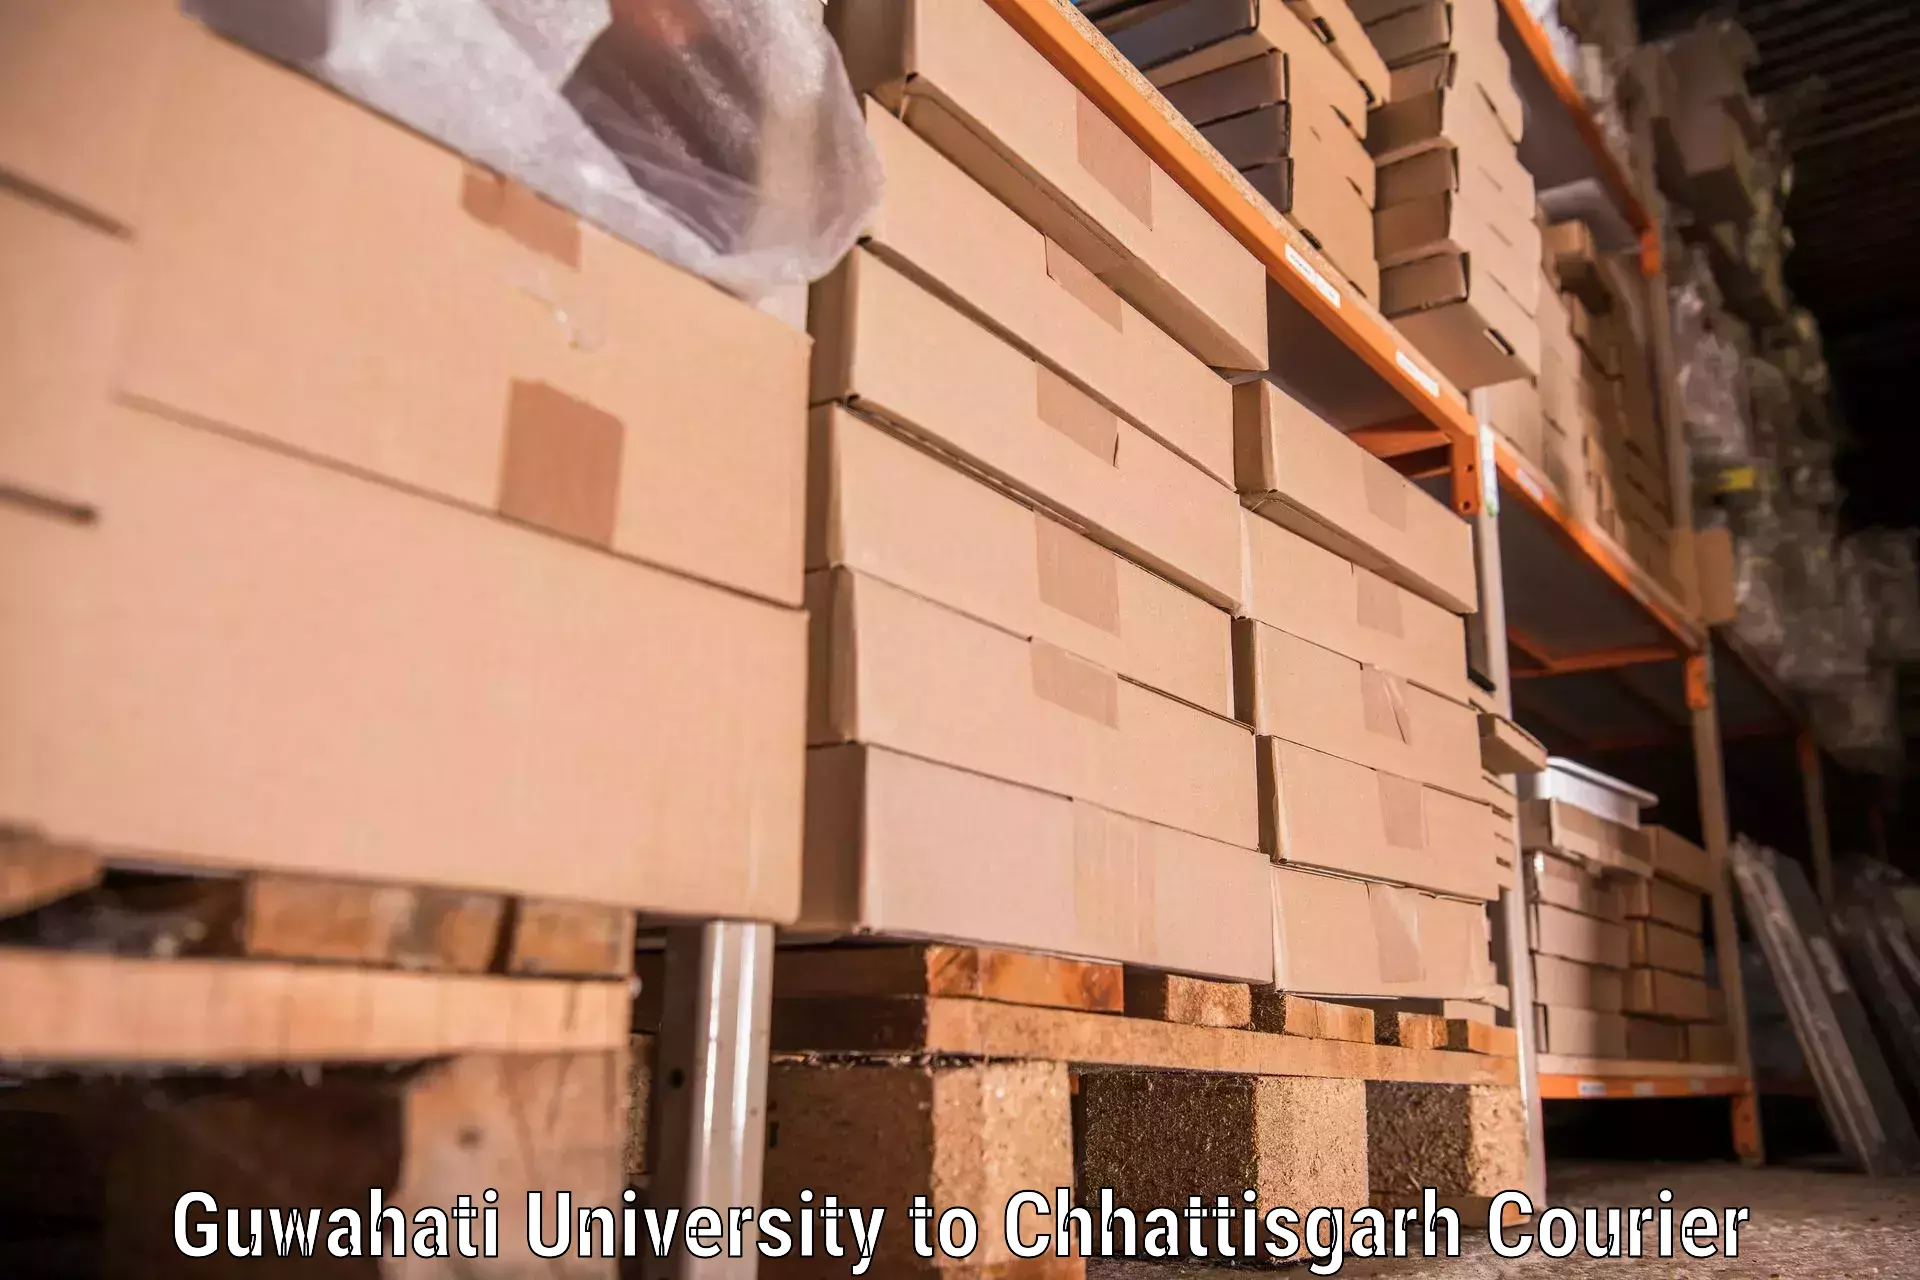 Safe household movers Guwahati University to Narayanpur